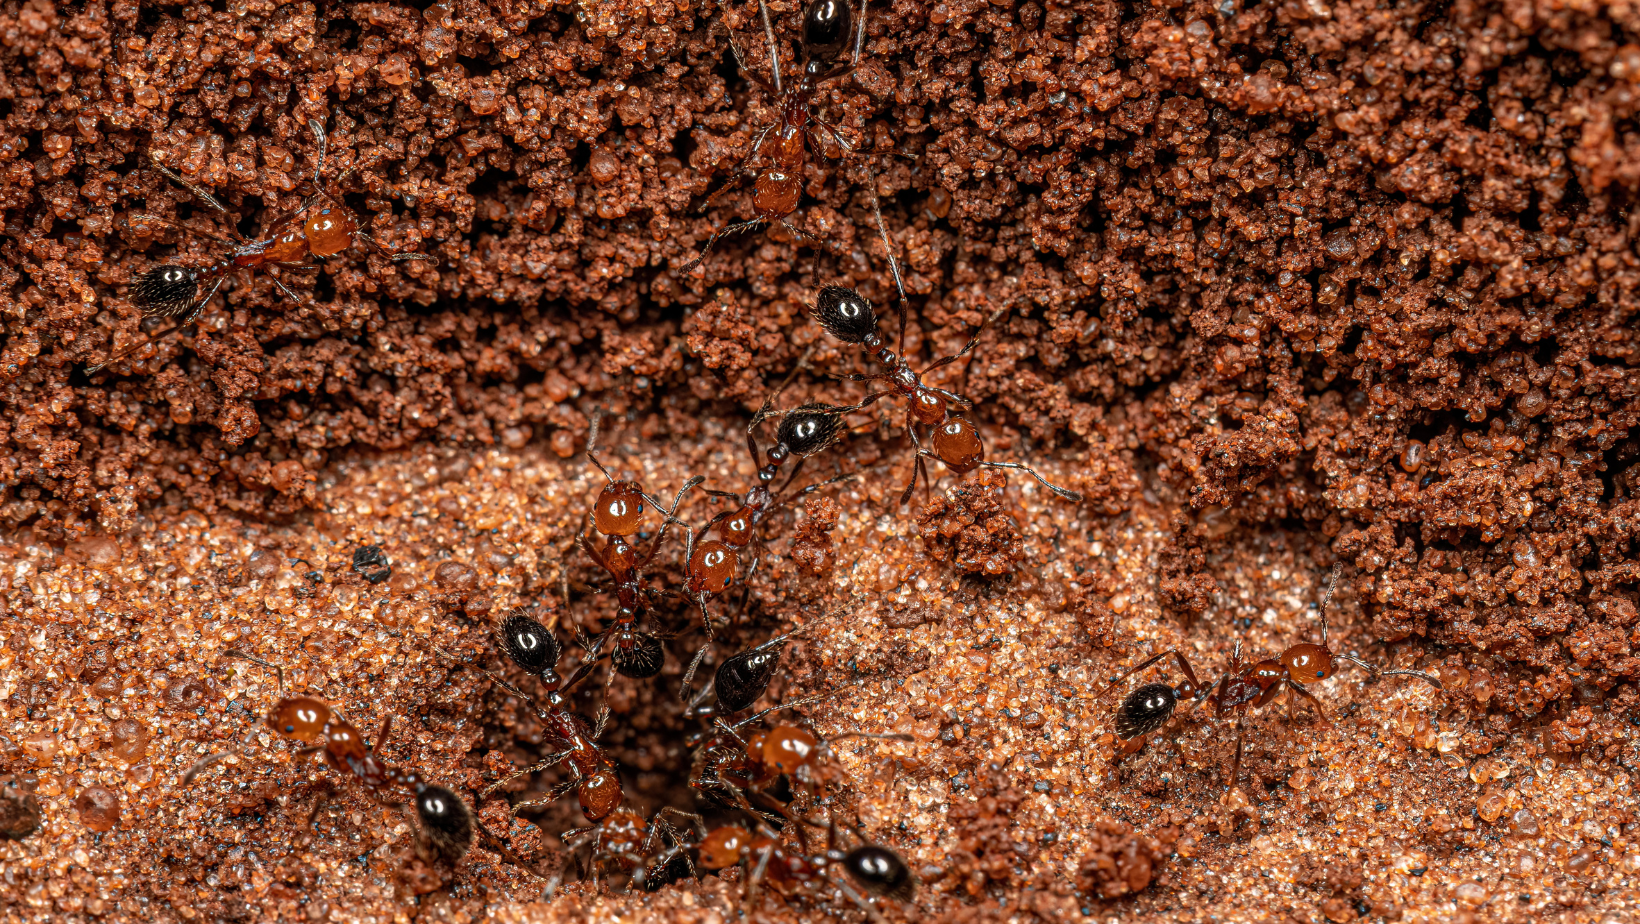 Fire ants entering ant mound